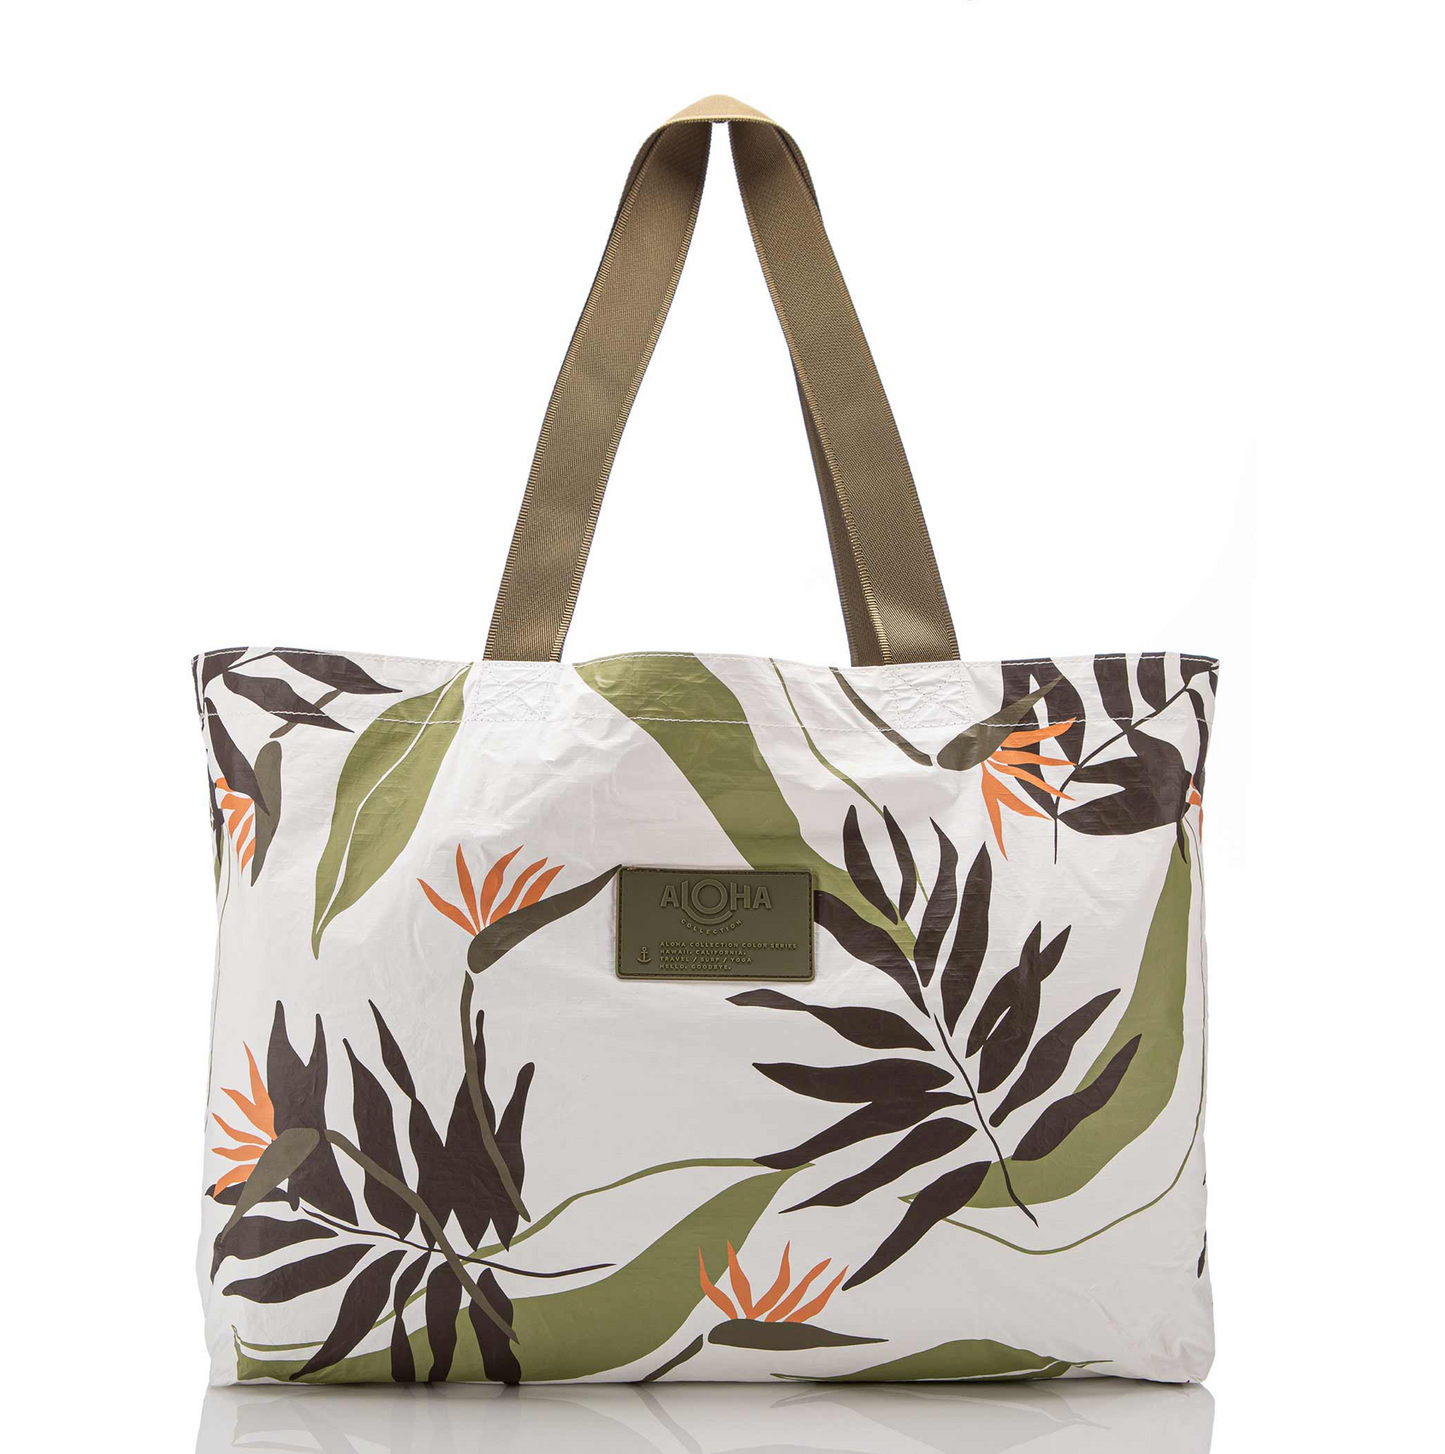 Painted Birds Green - Holo Holo Reversible Tote